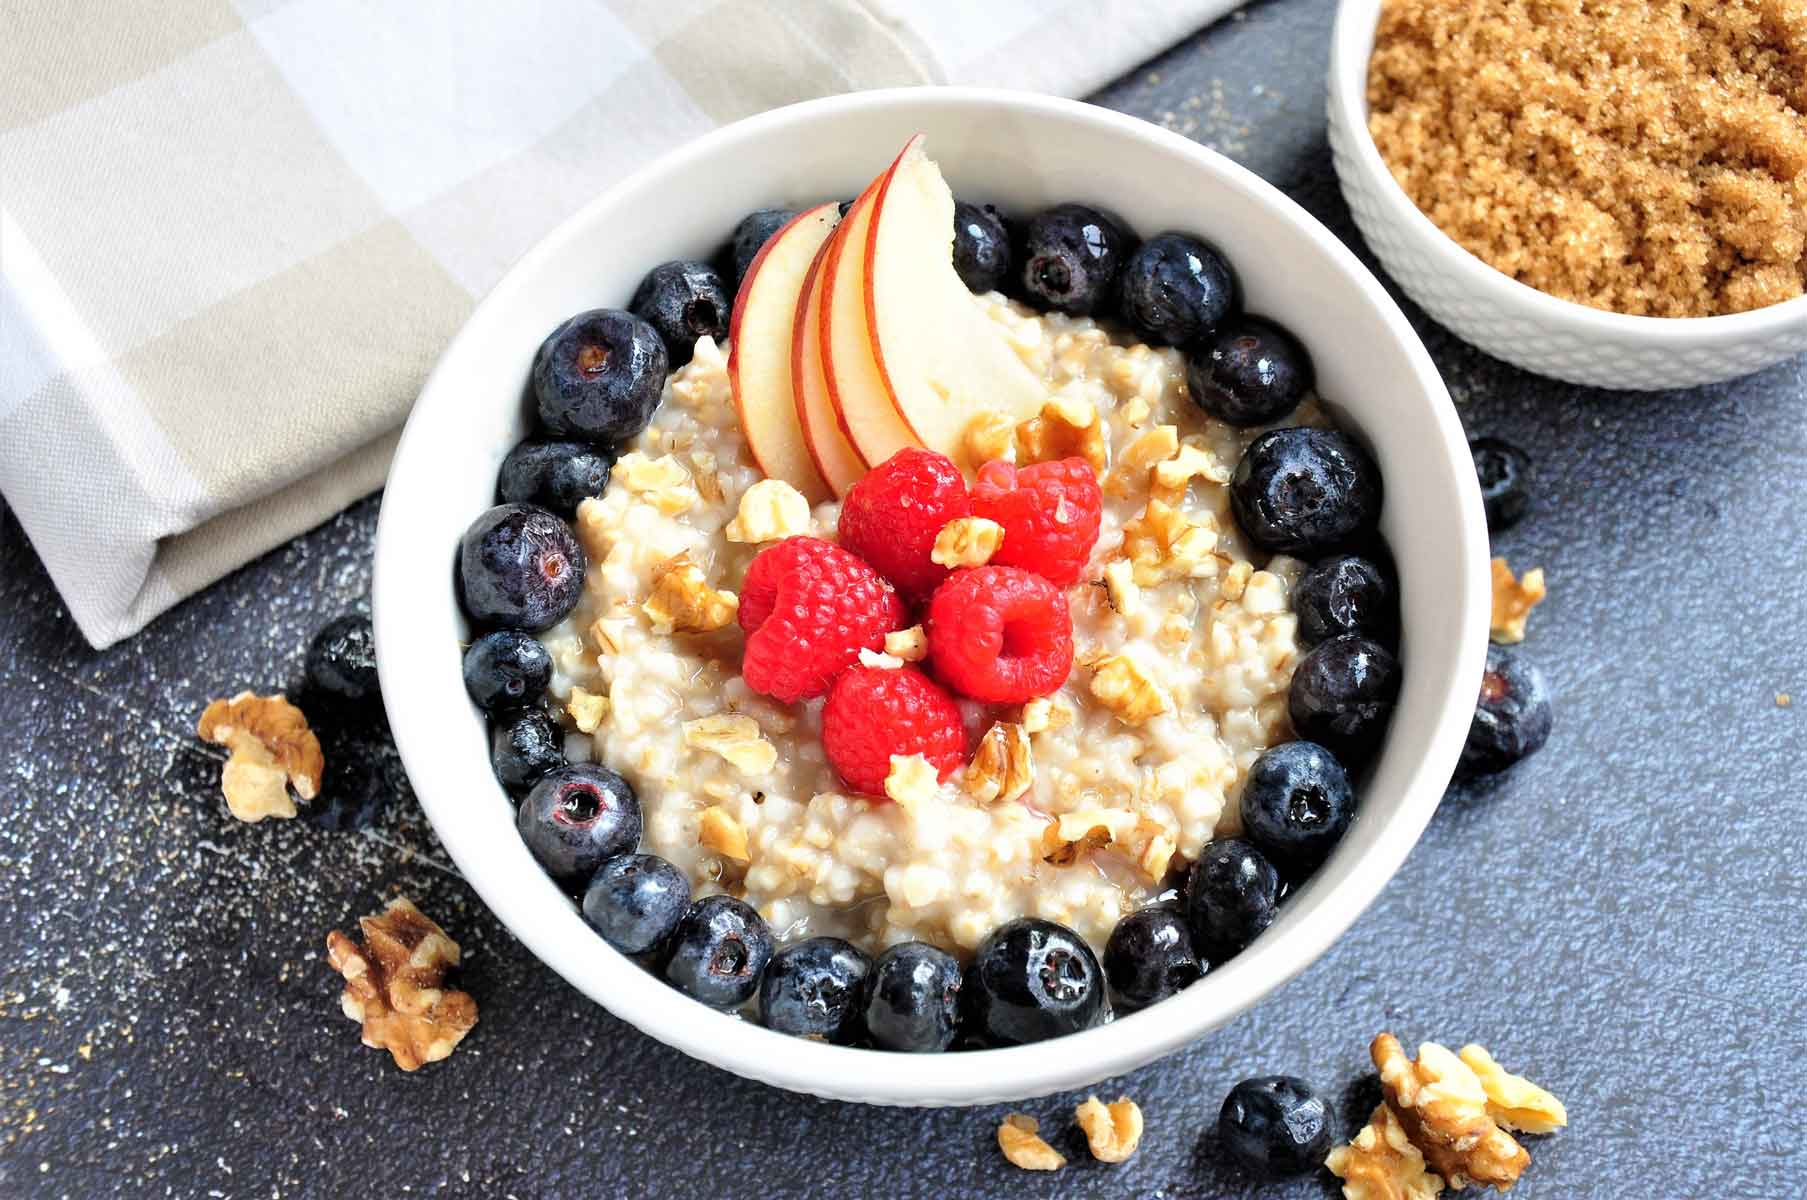 Instant pot cooked steel cut oats in bowl, served with berries and nuts on top.